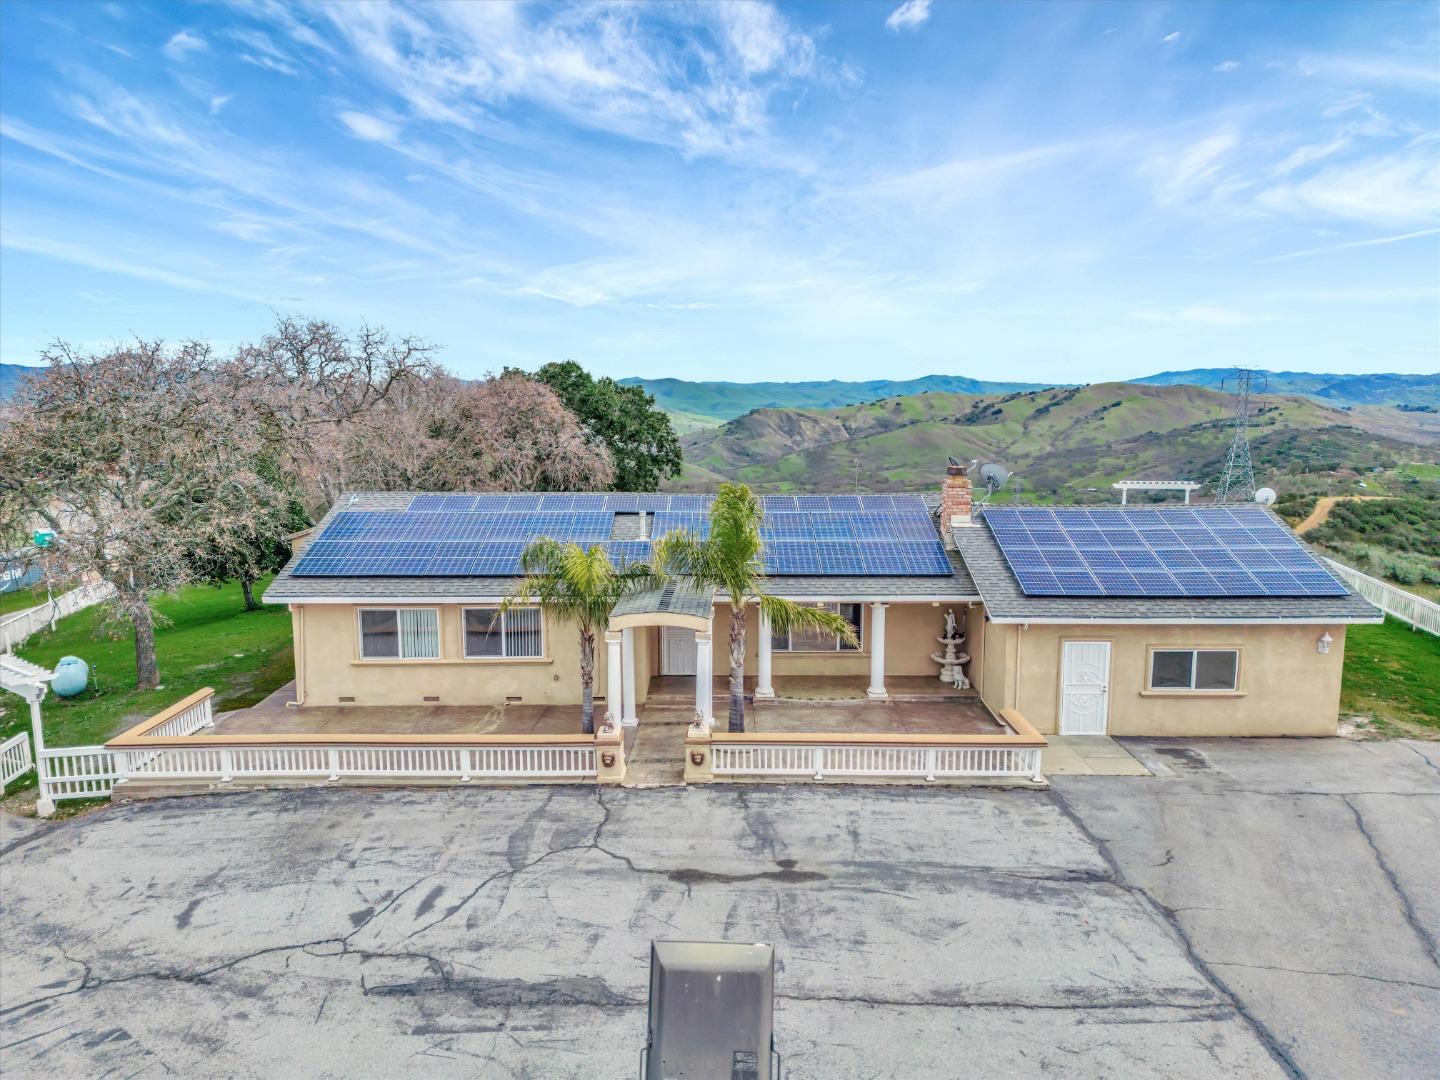 Photo of 11670 Cienega Rd in Hollister, CA